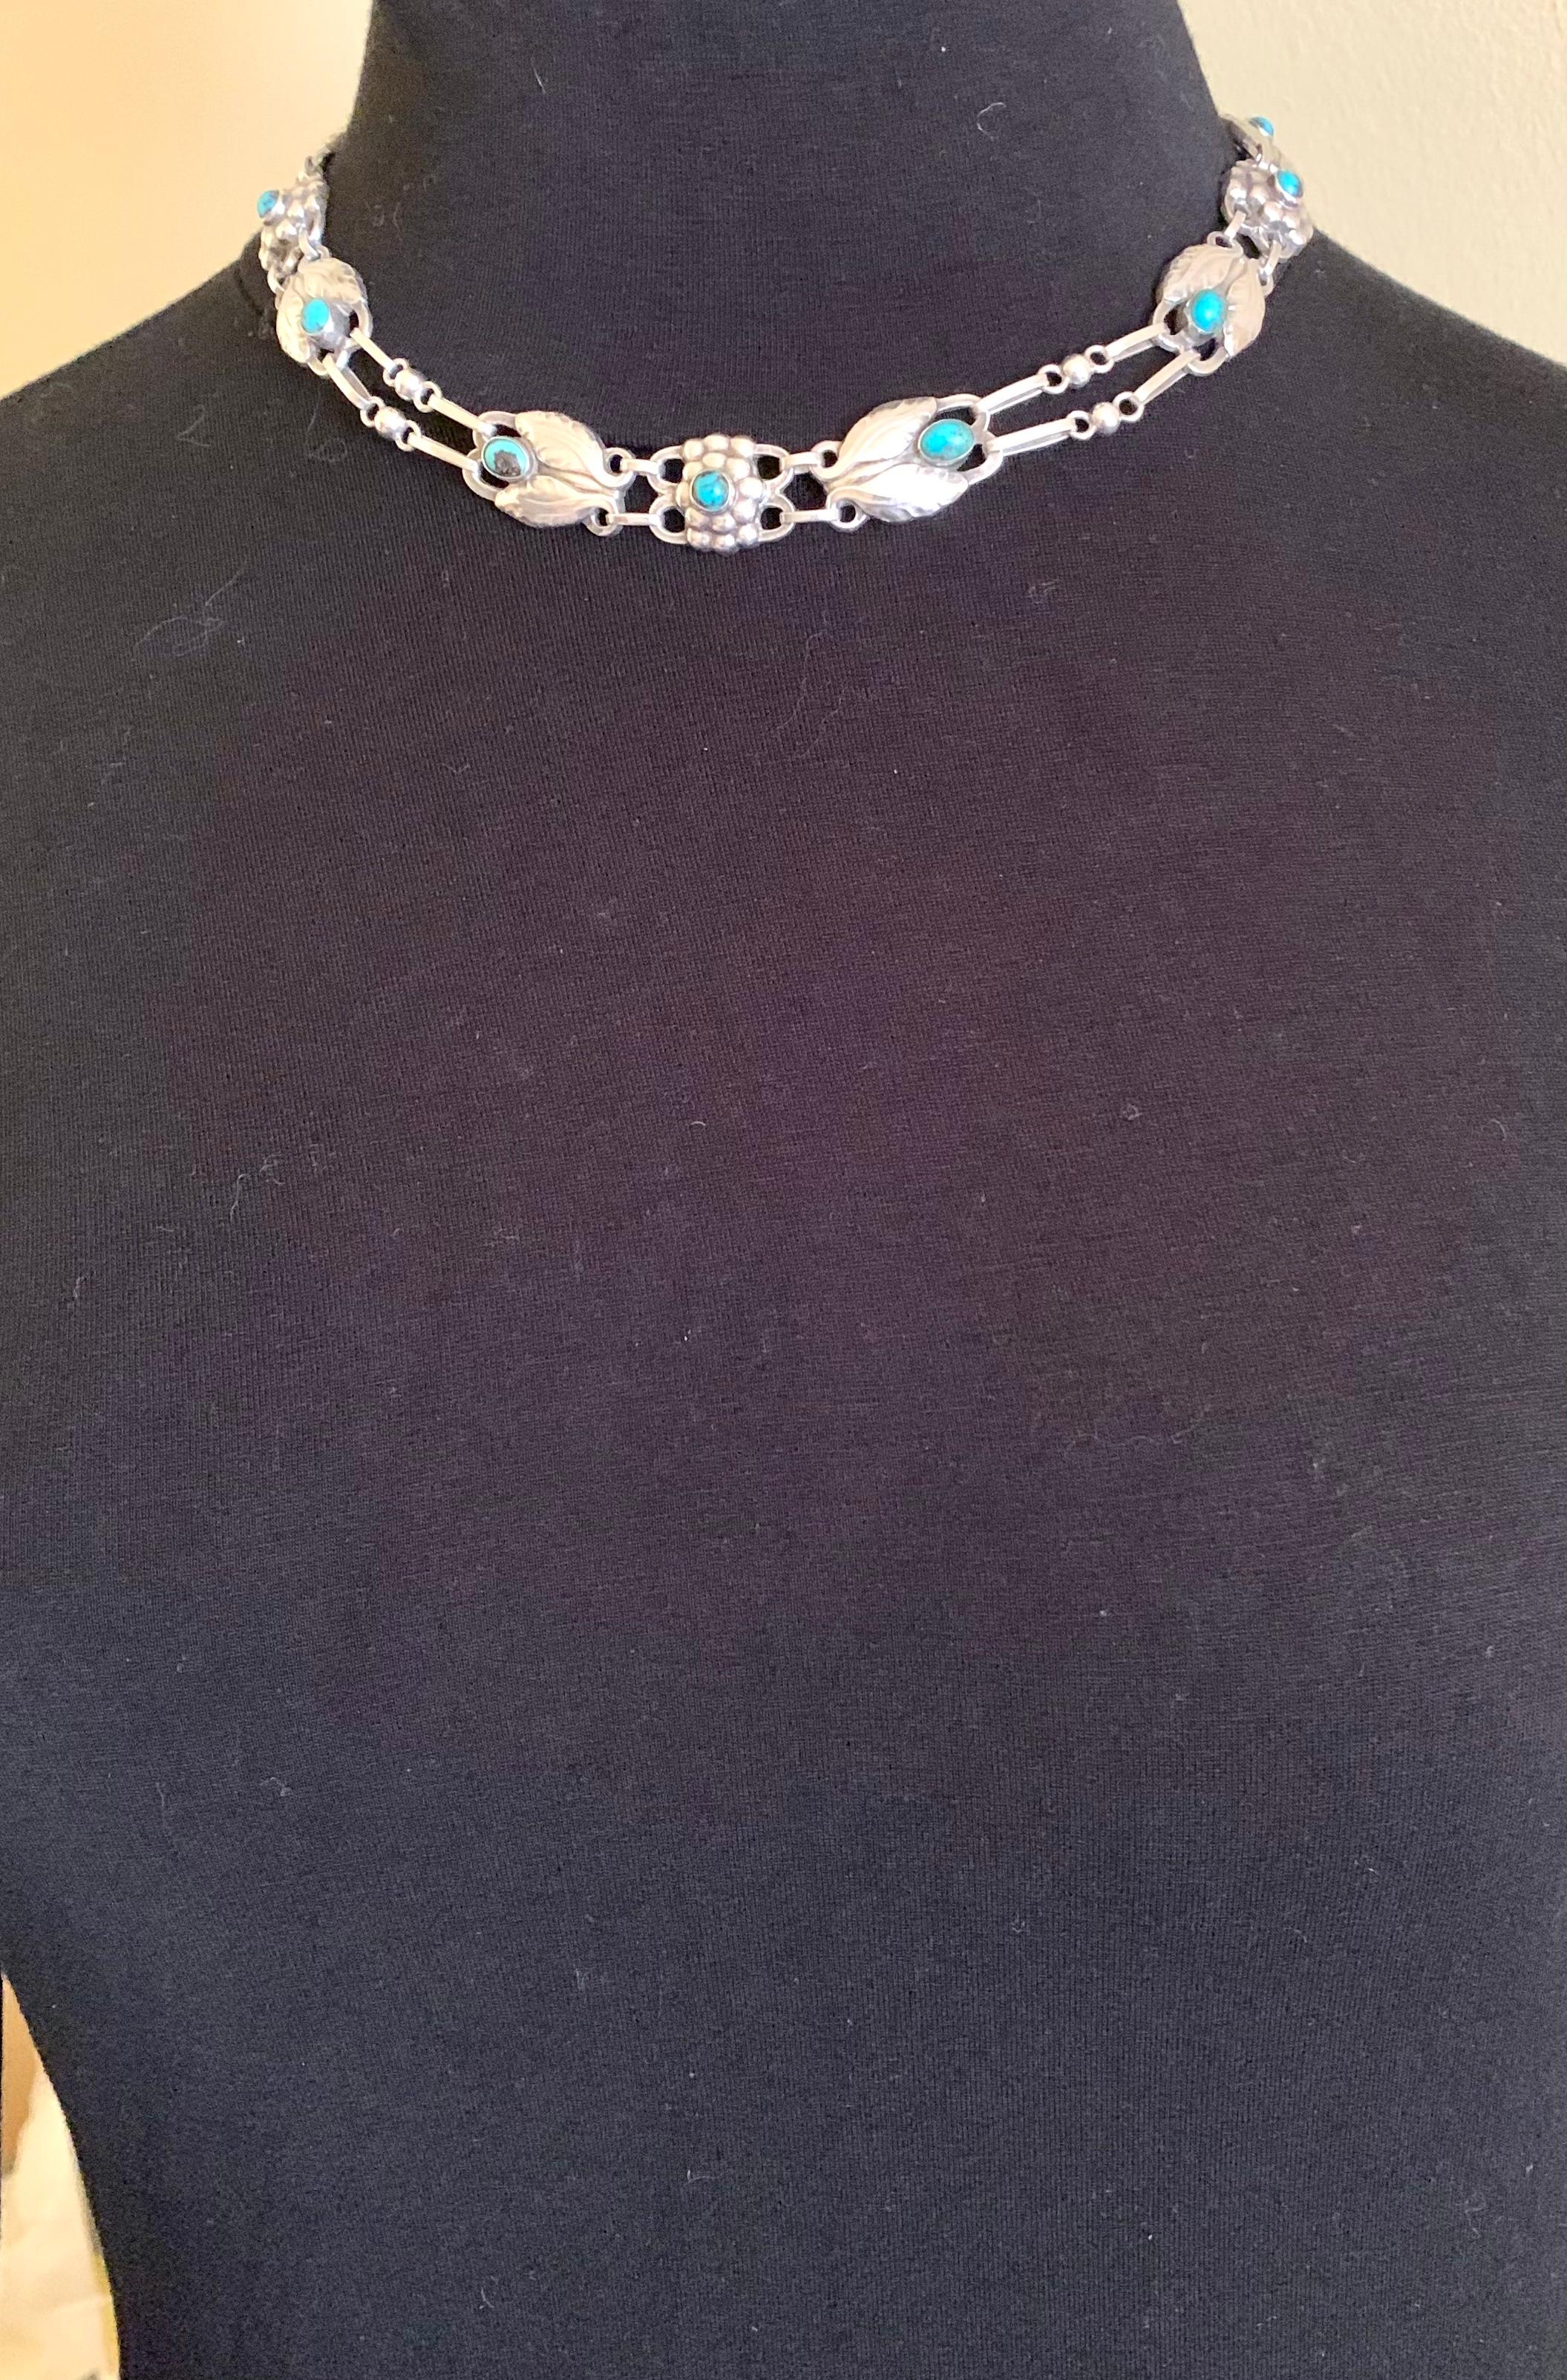 Rare Early Georg Jensen Cabochon Turquoise and Silver #1 Necklace, 1910-1925 For Sale 5